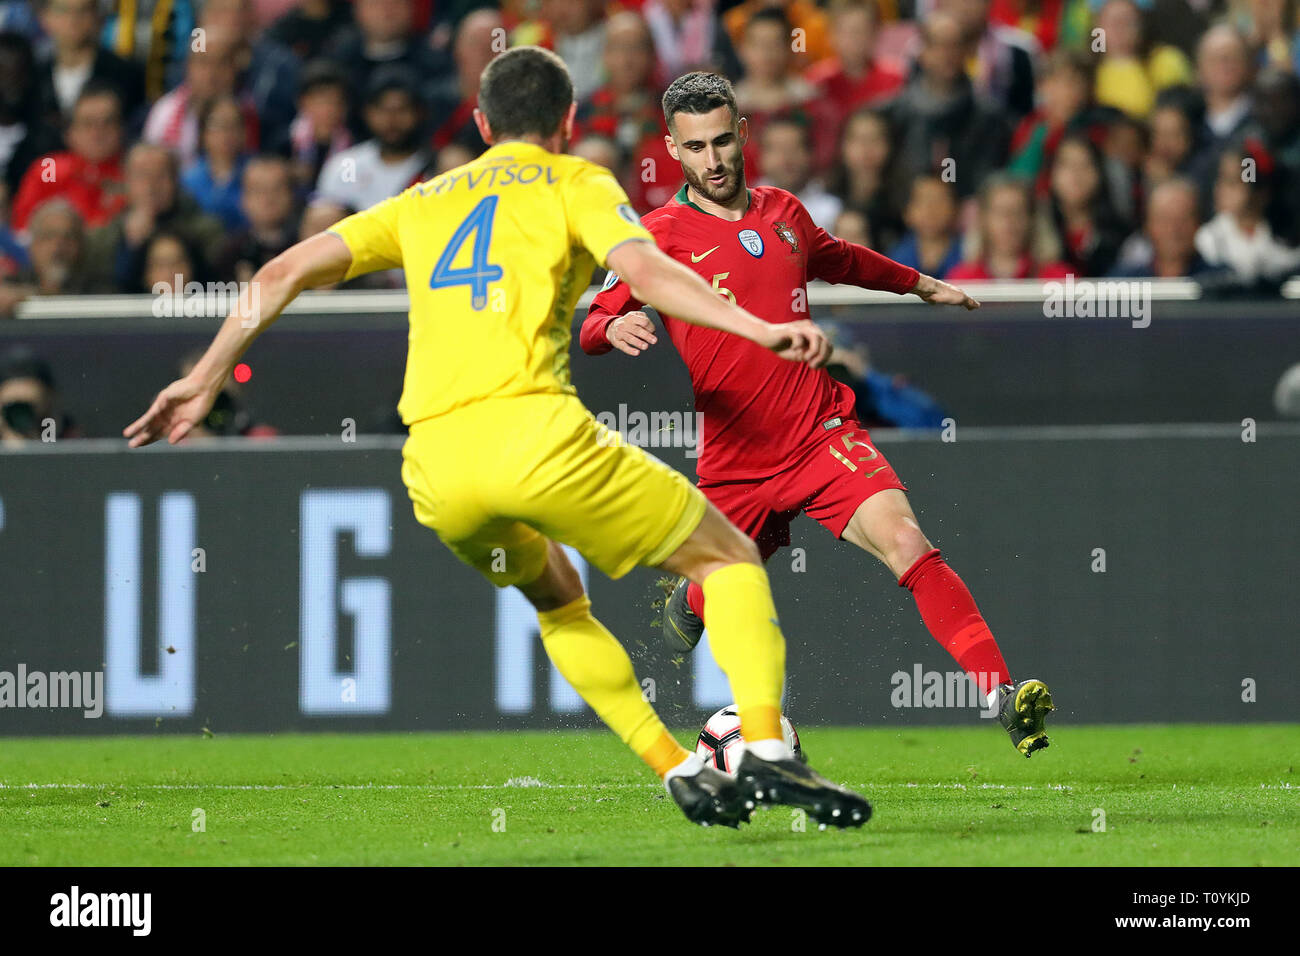 Rafa Silva of Portugal in action during the Qualifiers - Group B to Euro 2020 football match between Portugal vs Ukraine. (Final score: Portugal 0 - 0 Ukraine) Stock Photo